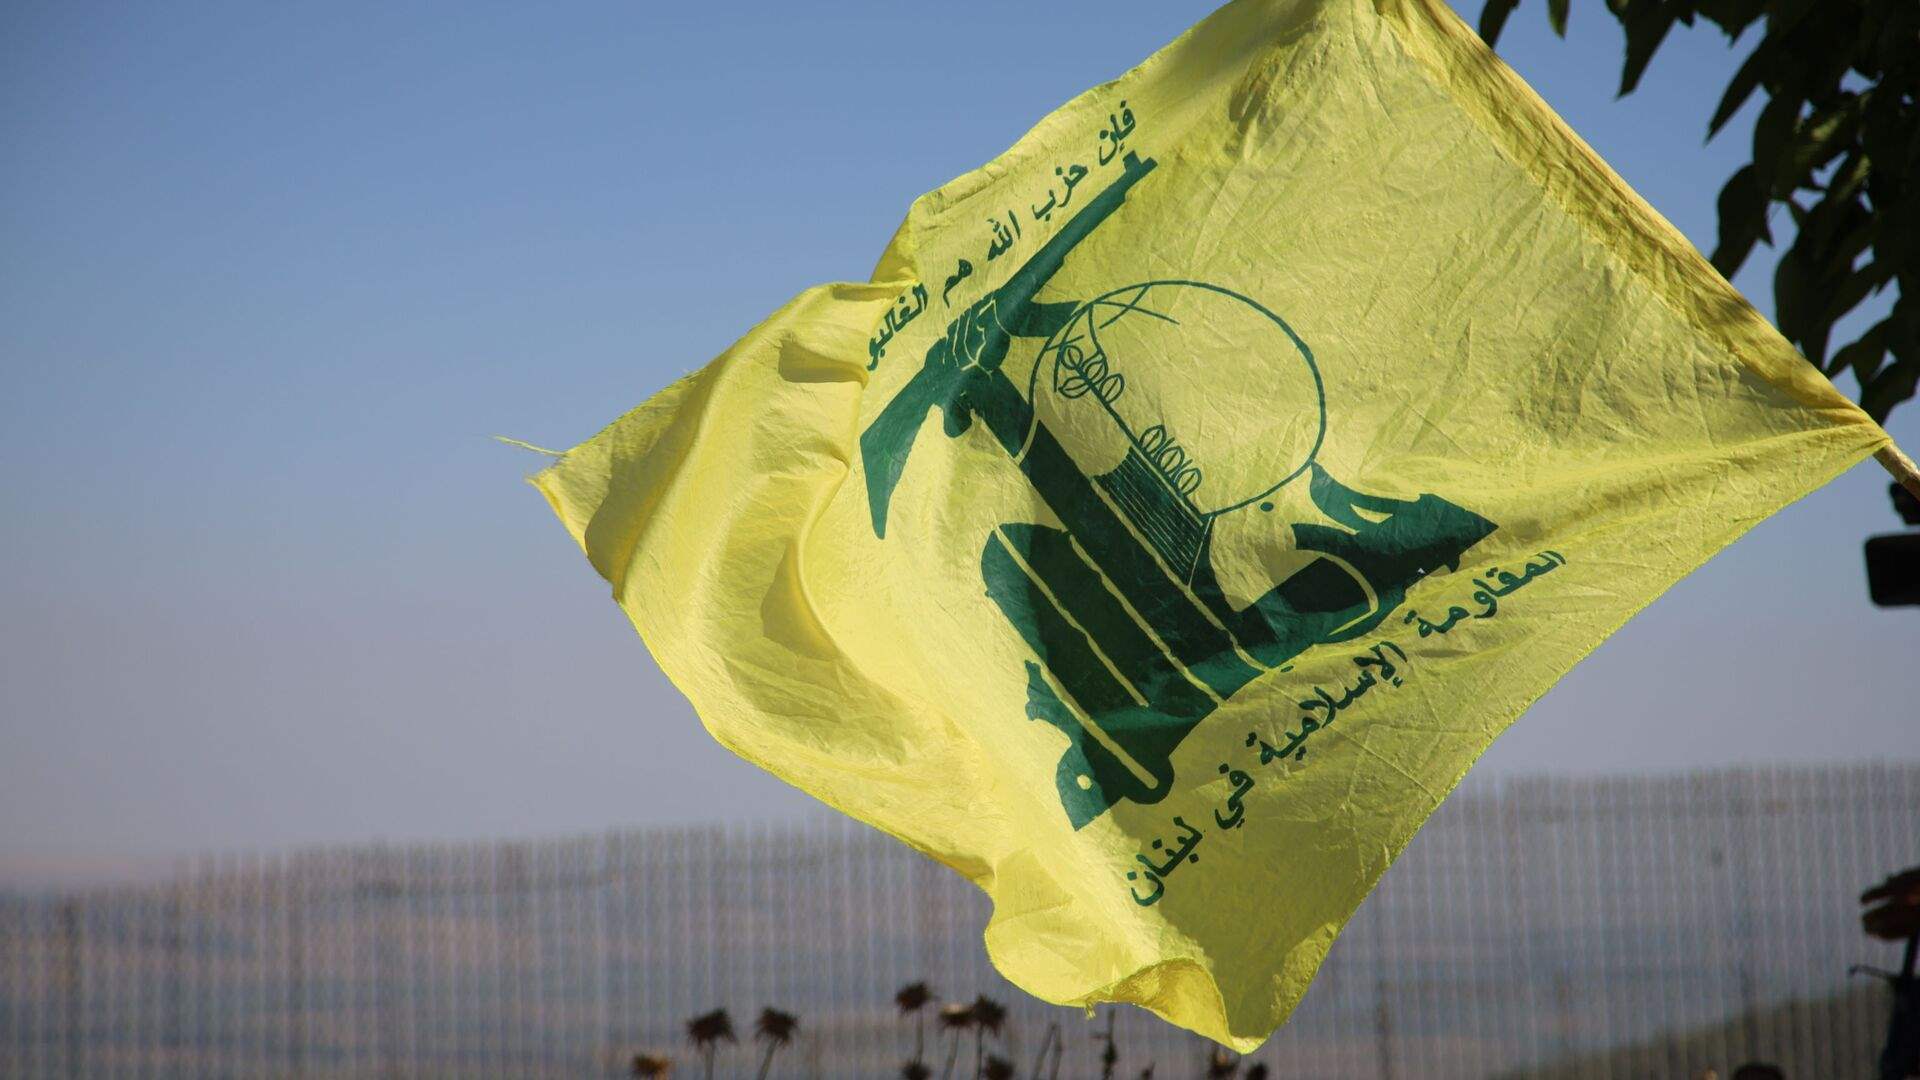 Source close to Hezbollah says two killed in Israeli strike on Beirut southern suburb: AFP